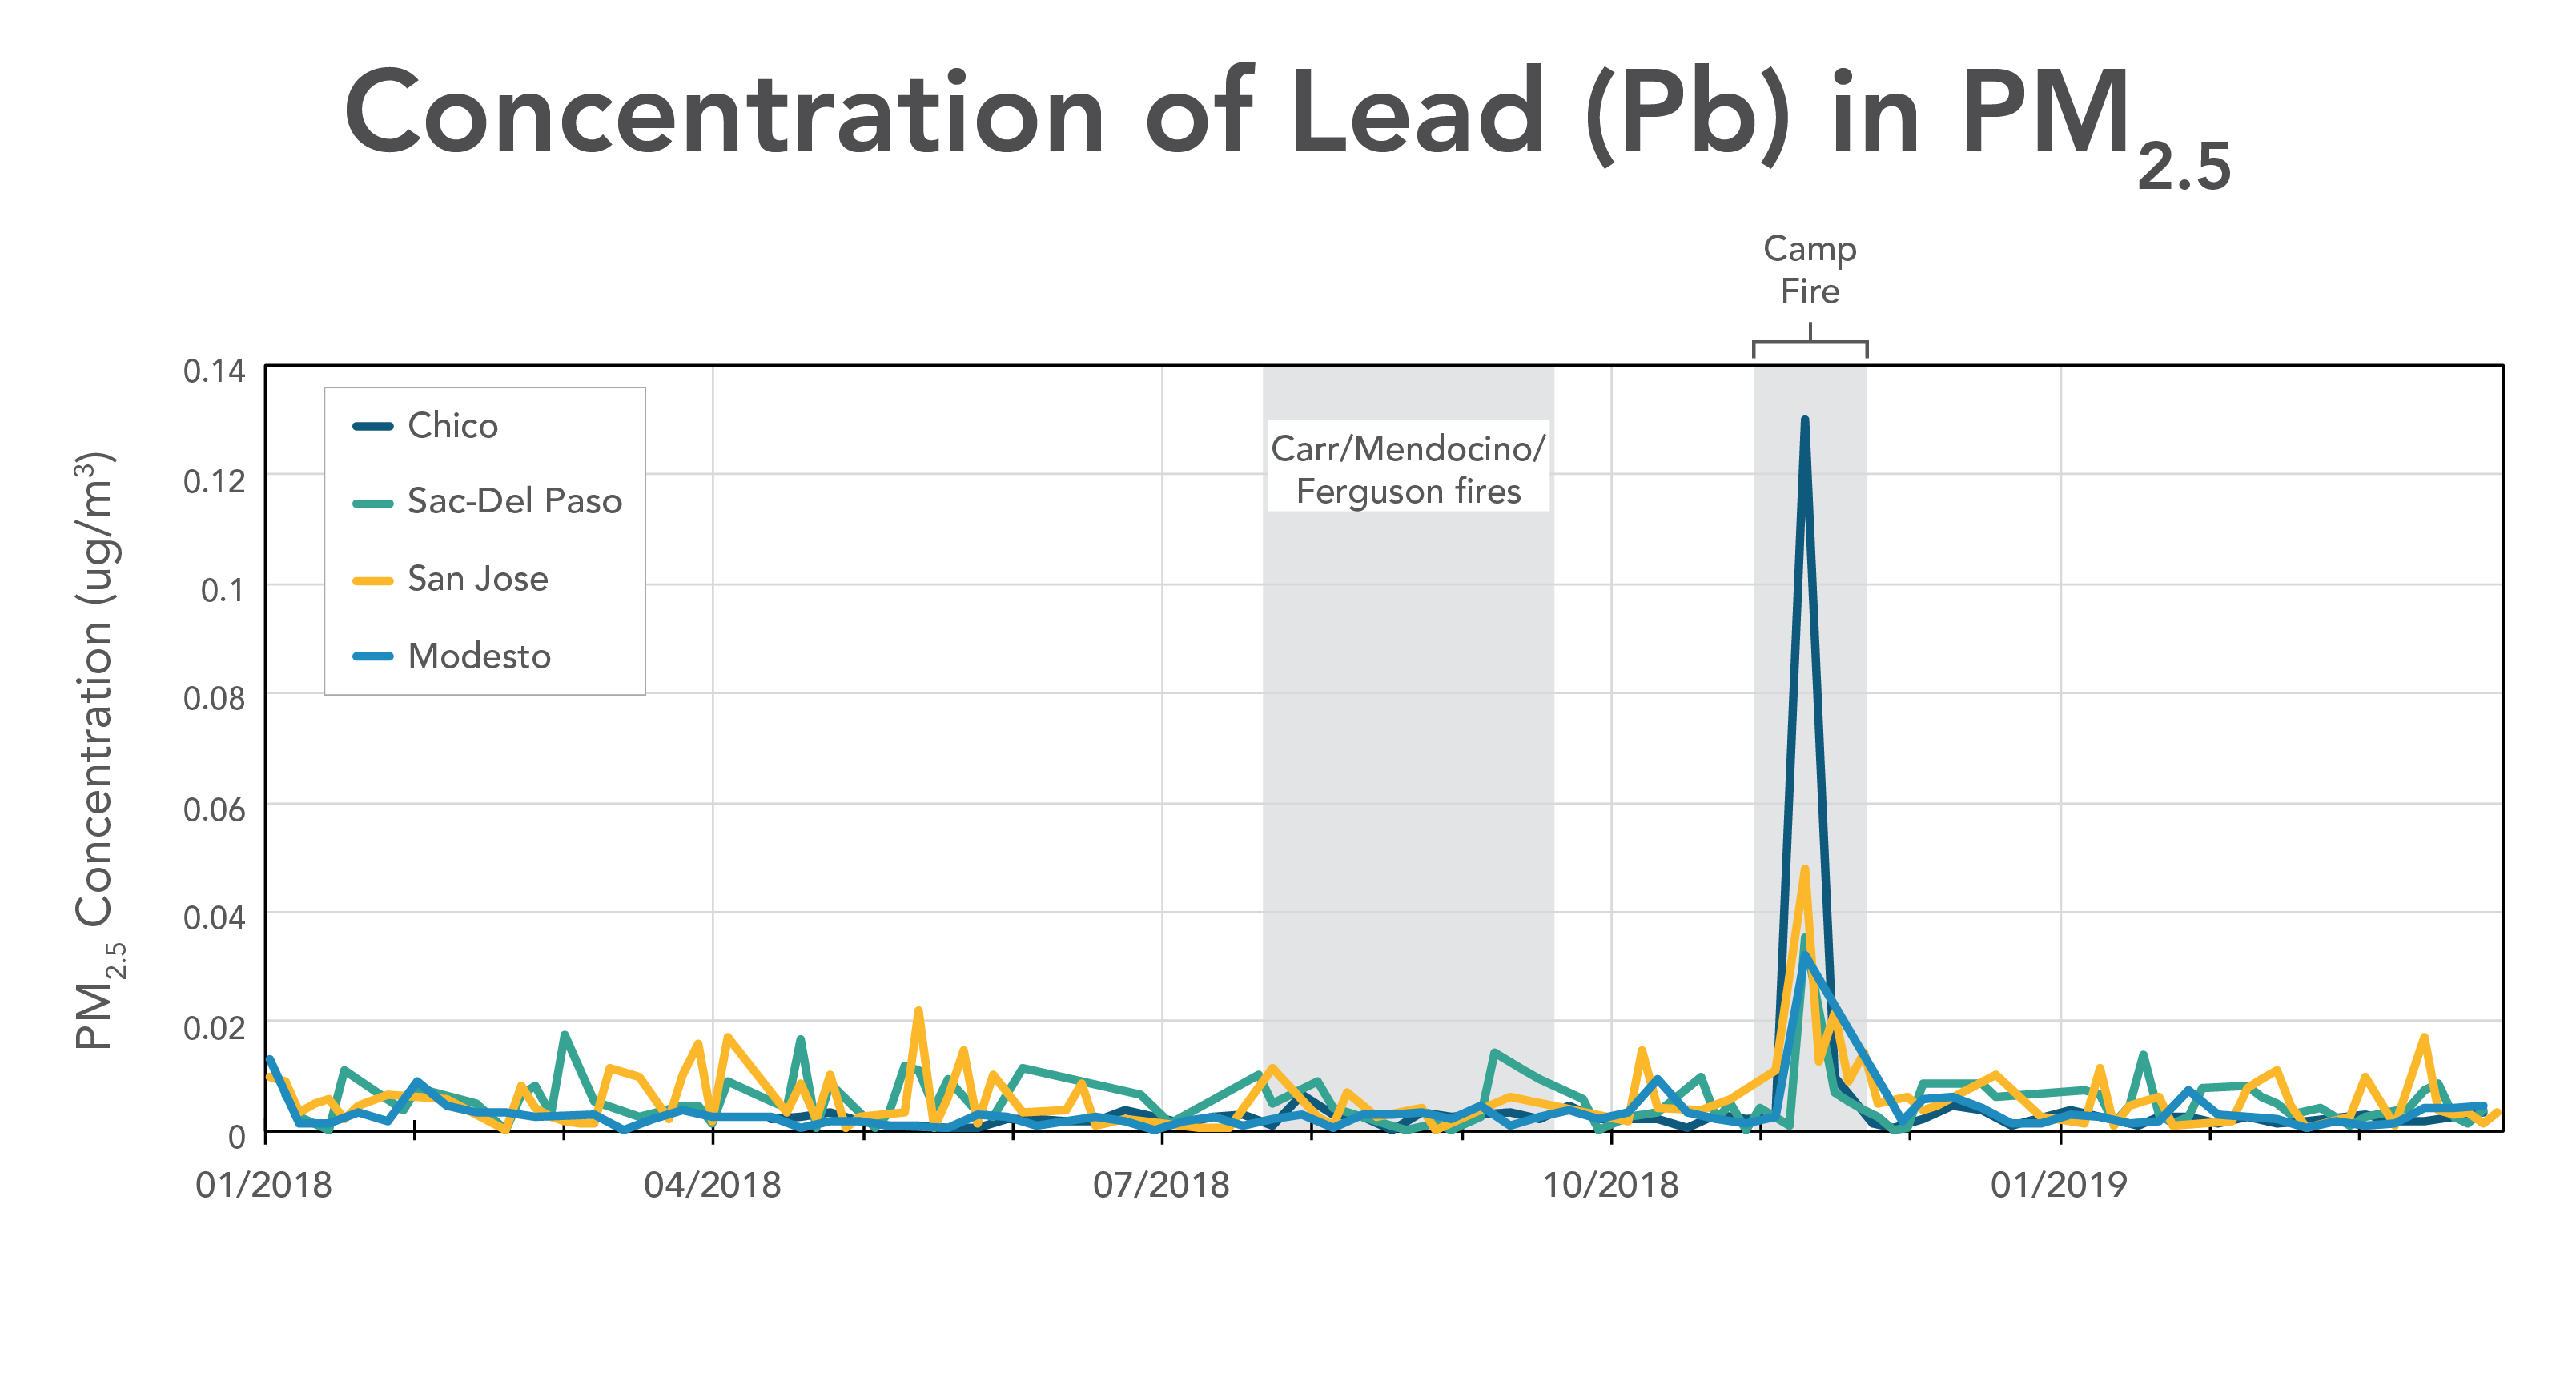 Chart showing concentrations of lead detected in wildfire smoke by air monitors in Chico, Sacramento, San Jose and Modesto. Chart shows a large spike in lead in Chico during the 2018 Camp Fire, with smaller spikes in Sacramento, San Jose and Modesto. No significant increase in lead is evident at any location during the Carr, Mendocino Complex or Ferguson wildfires that burned between July and September of the same year.